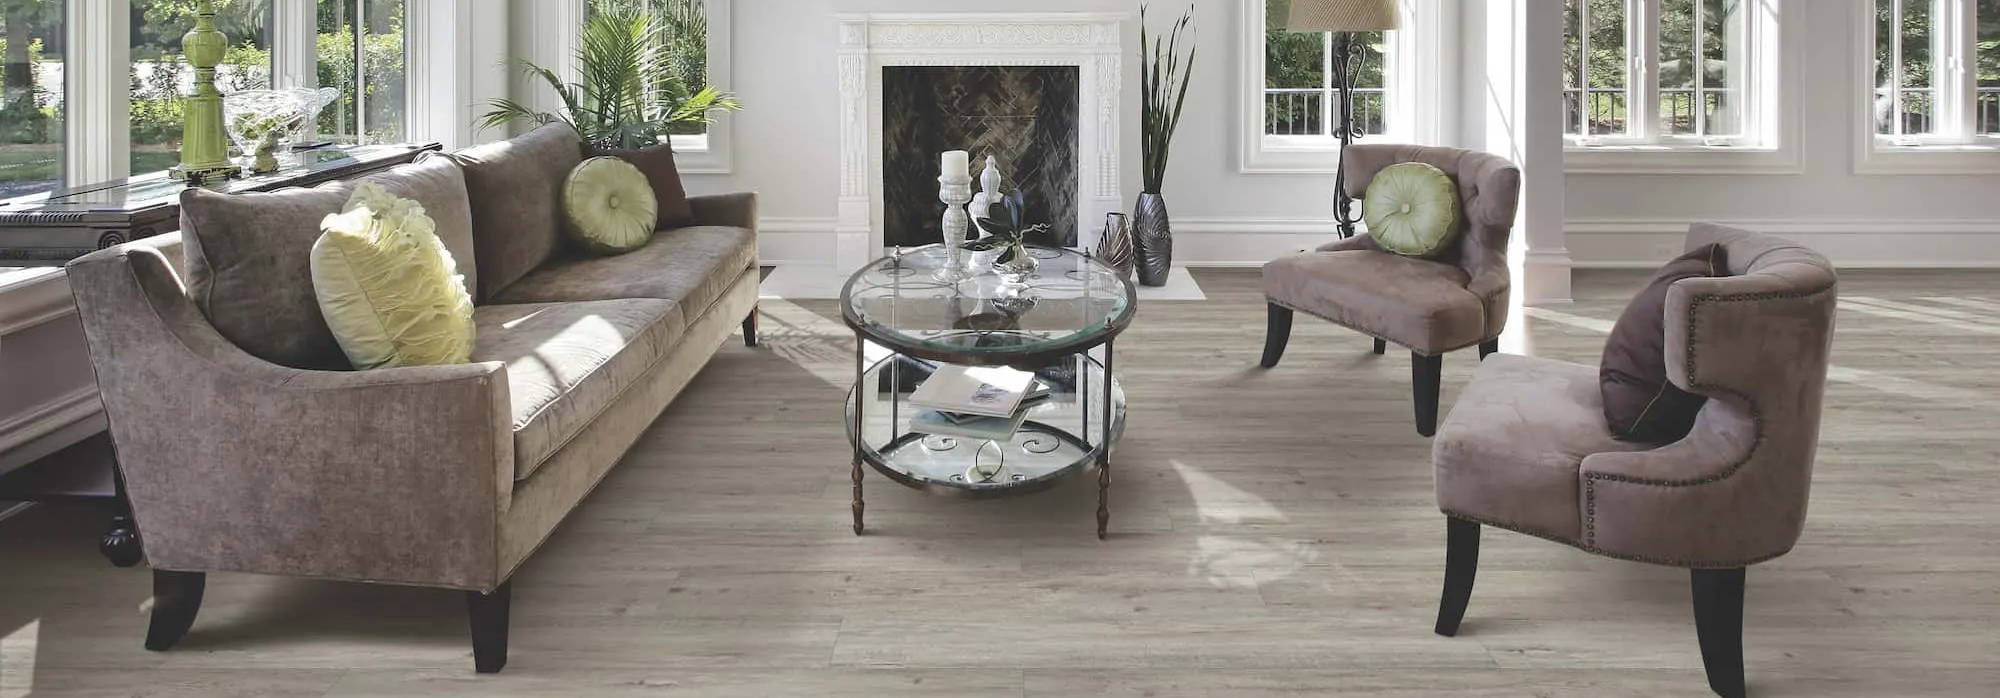 Luxury Vinyl Flooring at Kaoud Rugs in West Hartford and Manchester CT